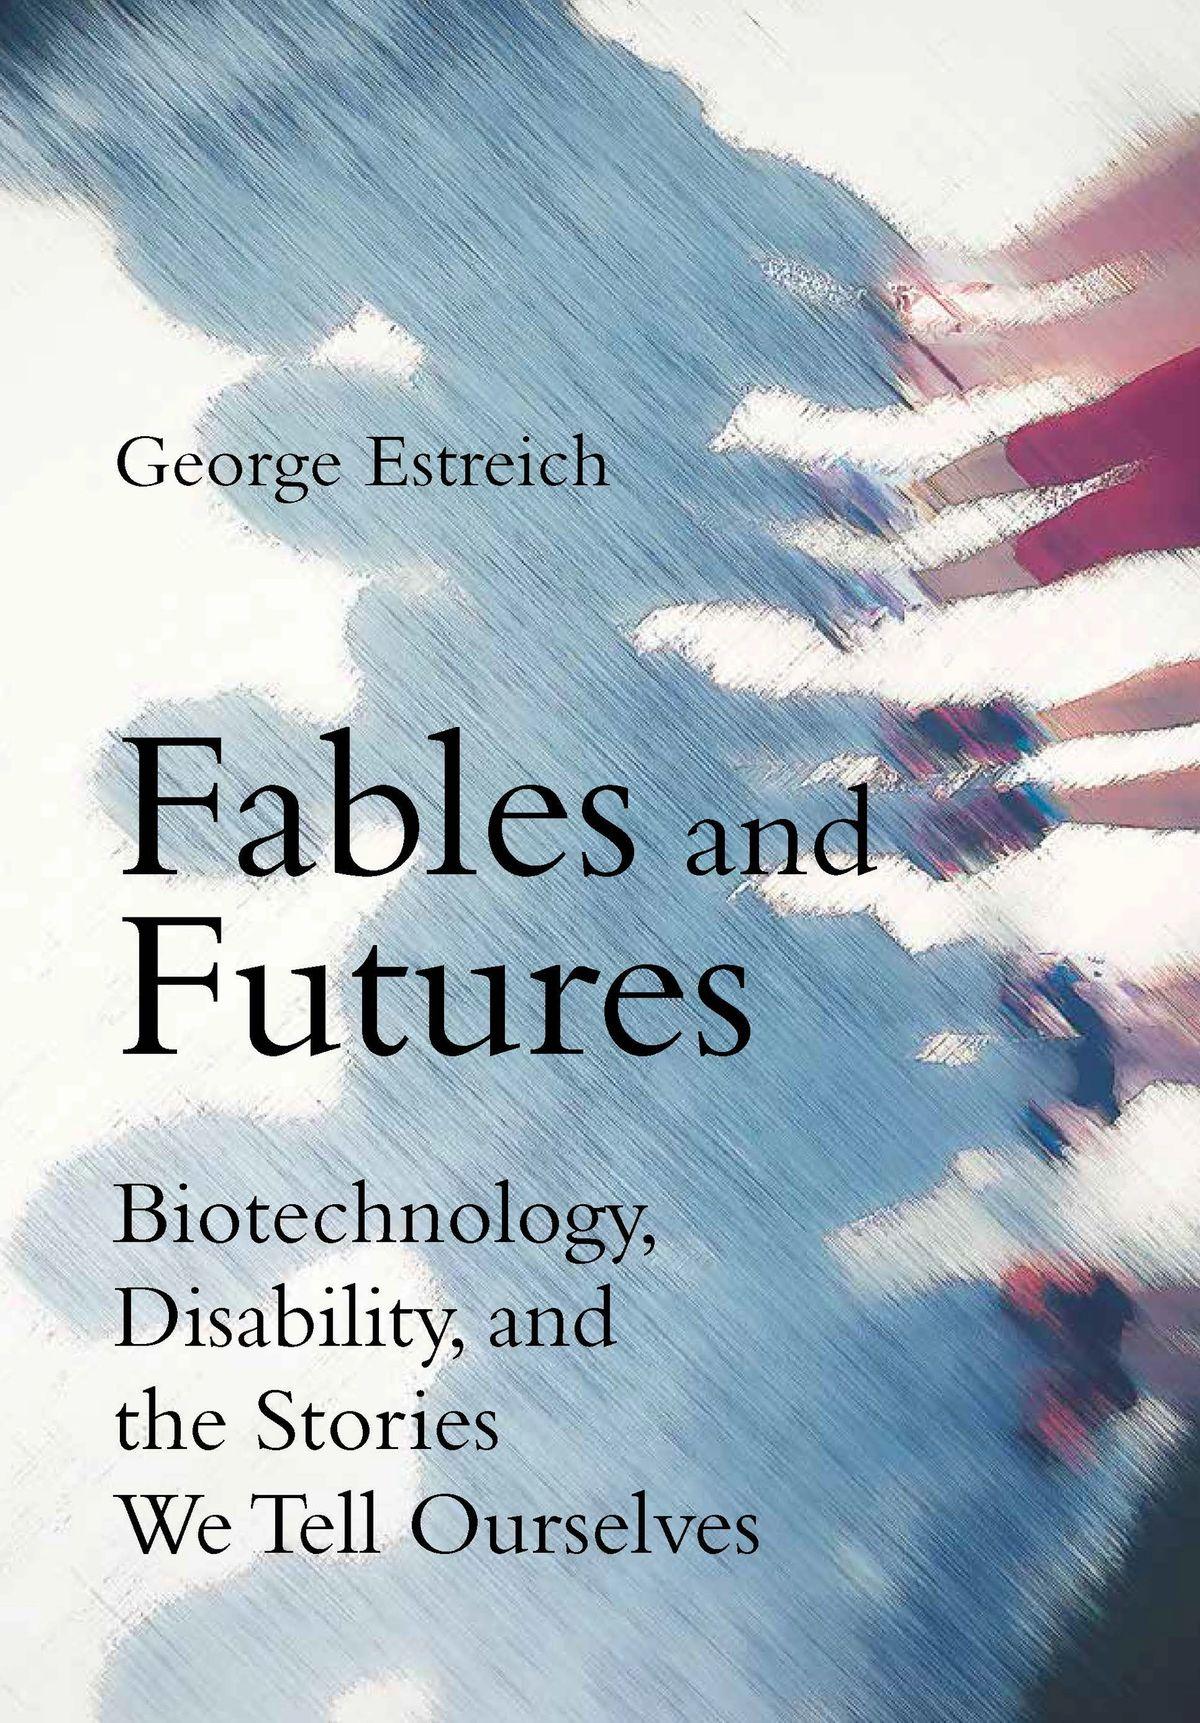 The cover of George Estreich's book Fables and Futures